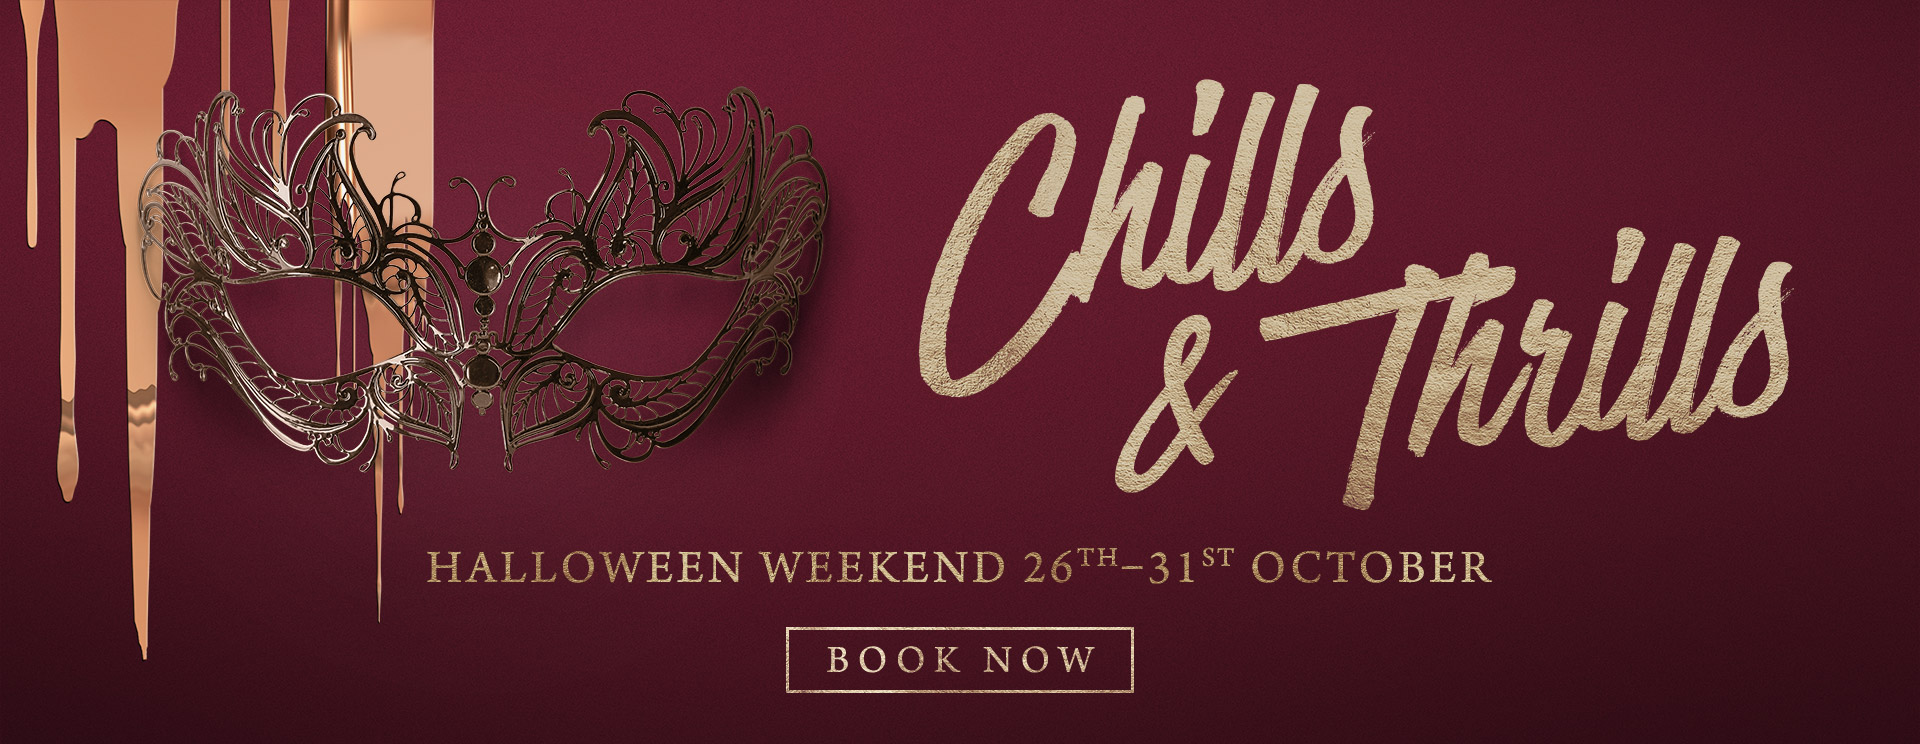 Chills & Thrills this Halloween at The White Swan